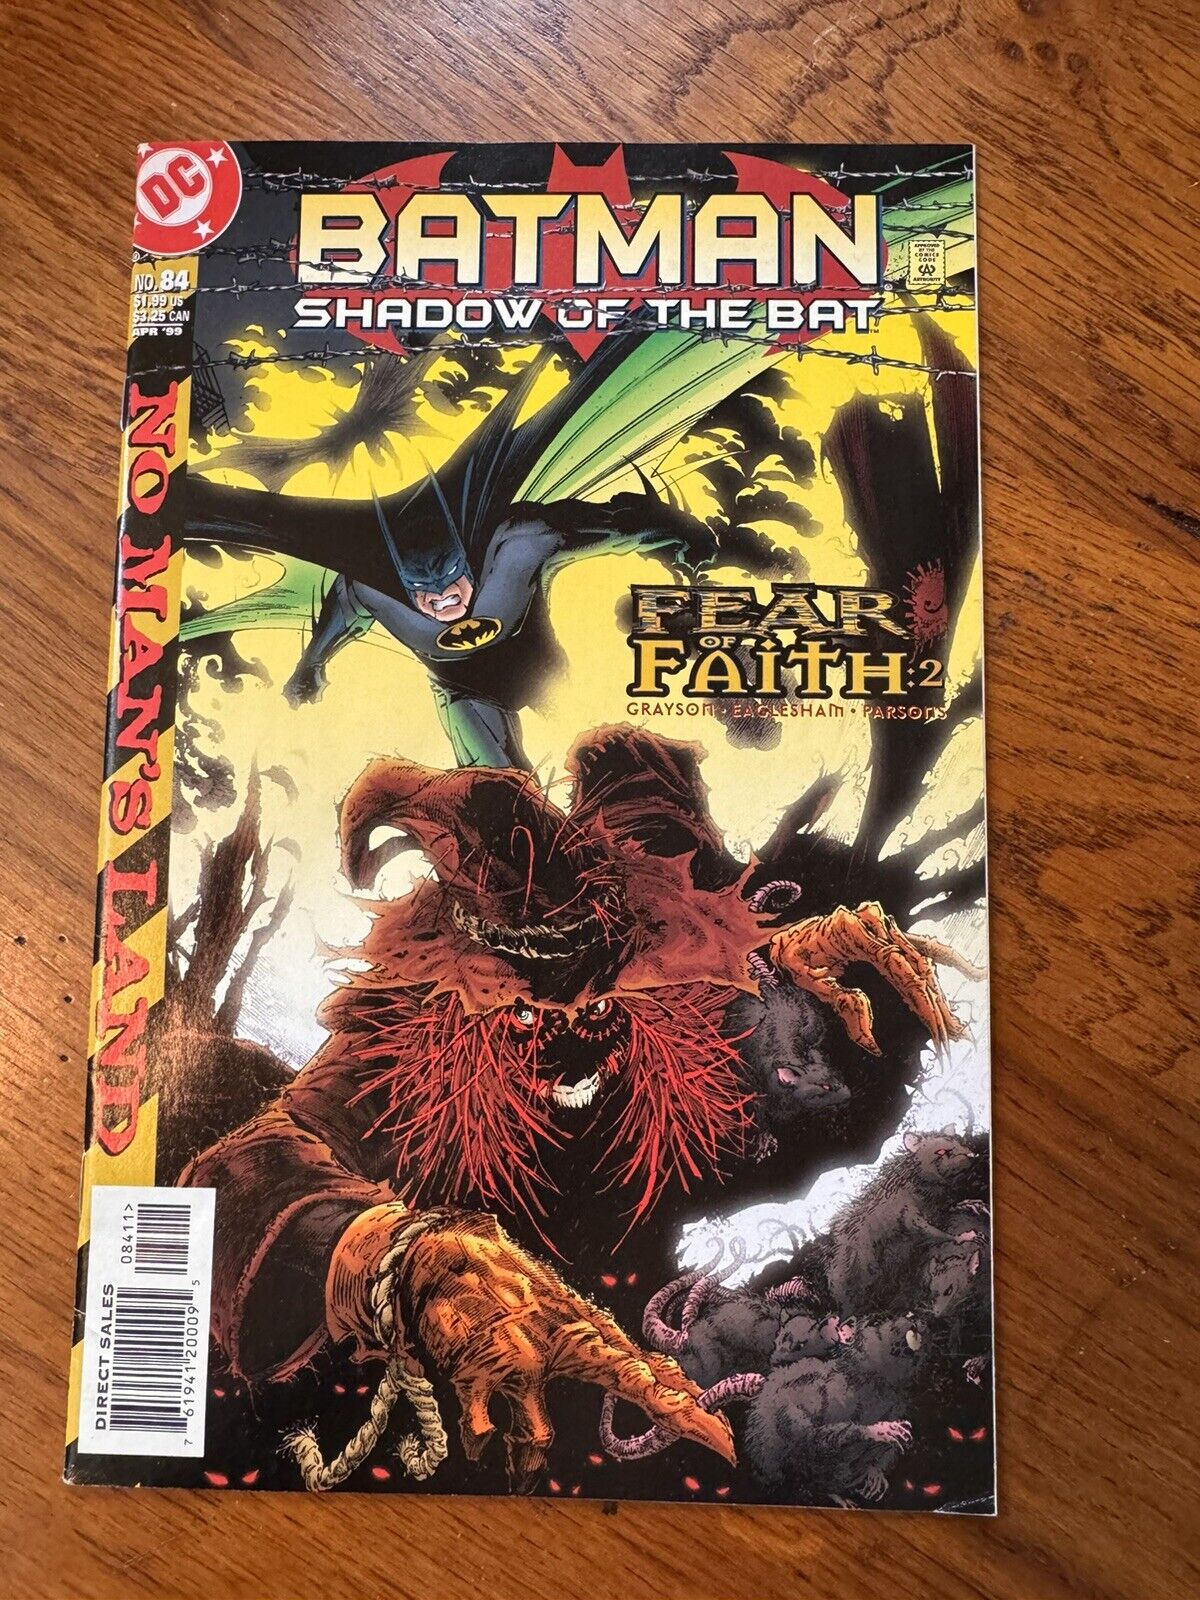 Batman: Shadow of the Bat #84 - Apr 1999 - DC Comics- BAGGED AND BOARDED